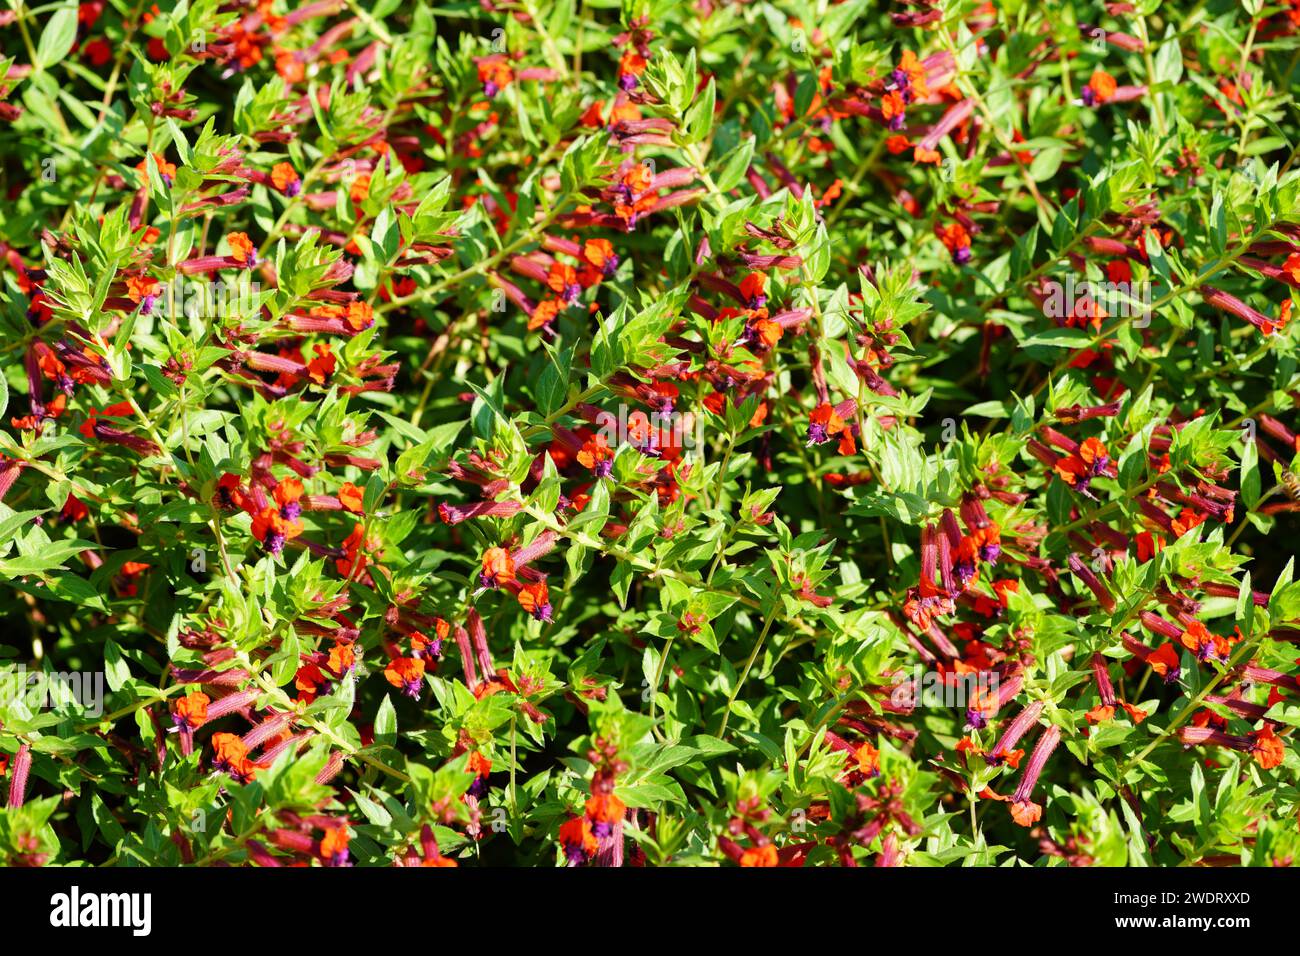 Red flowers of Cuphea Llavea. Flowering plant close-up. Stock Photo